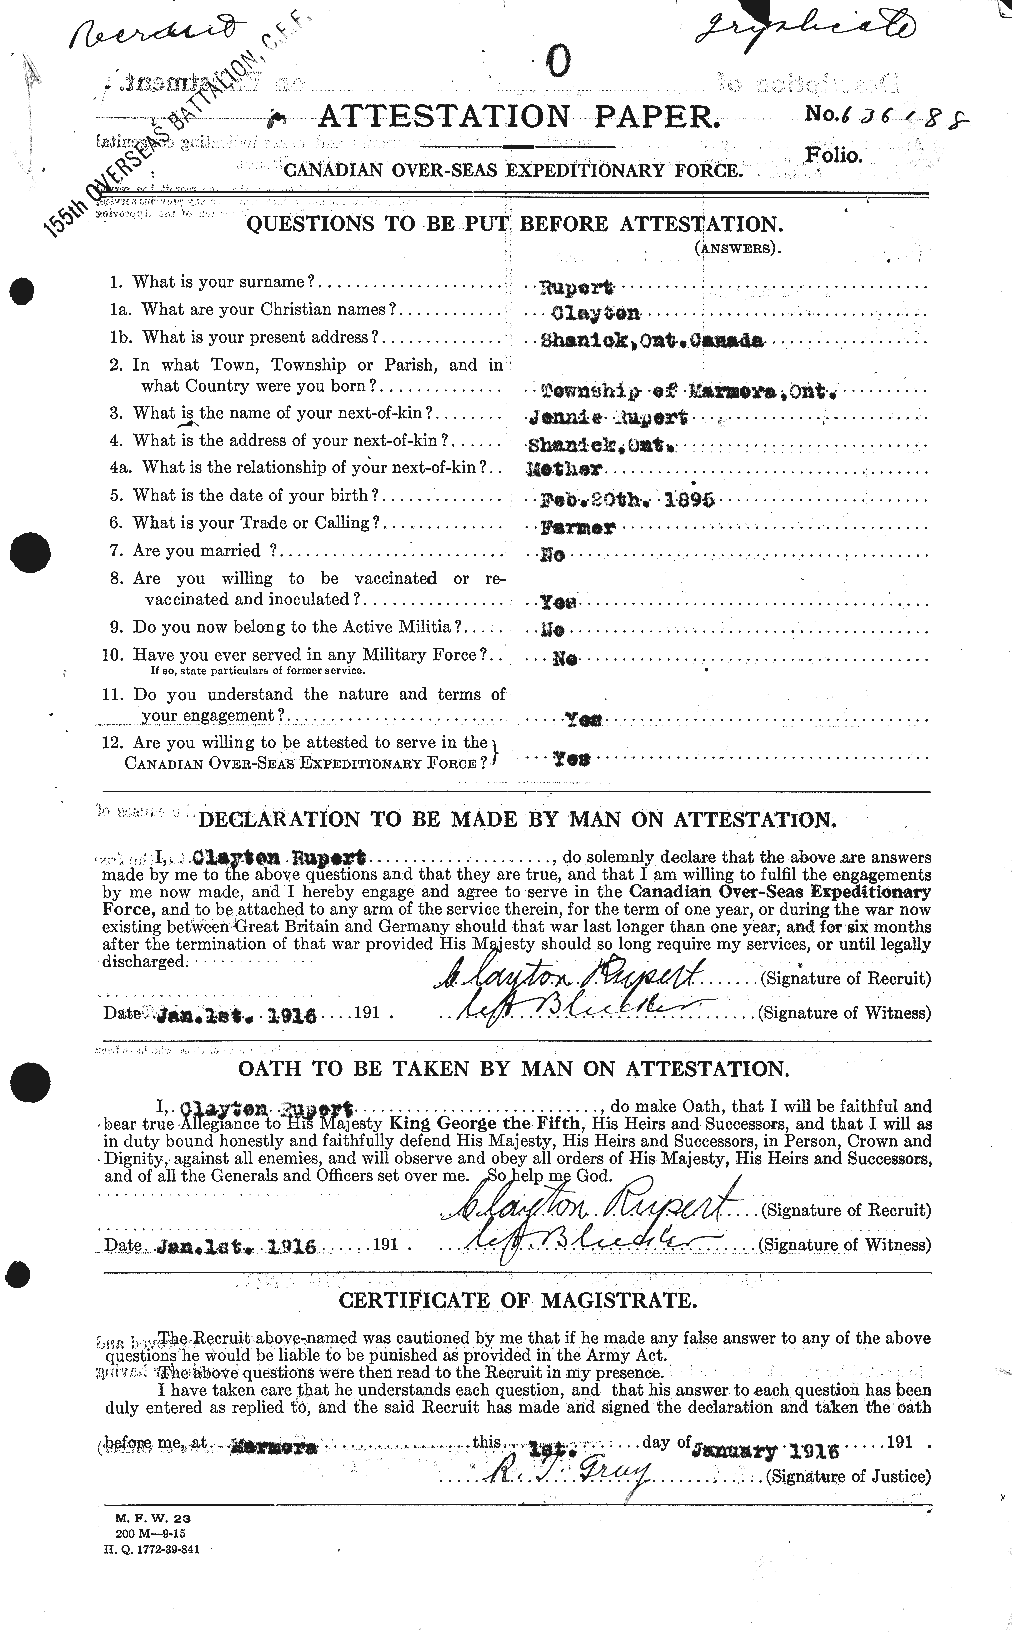 Personnel Records of the First World War - CEF 618545a